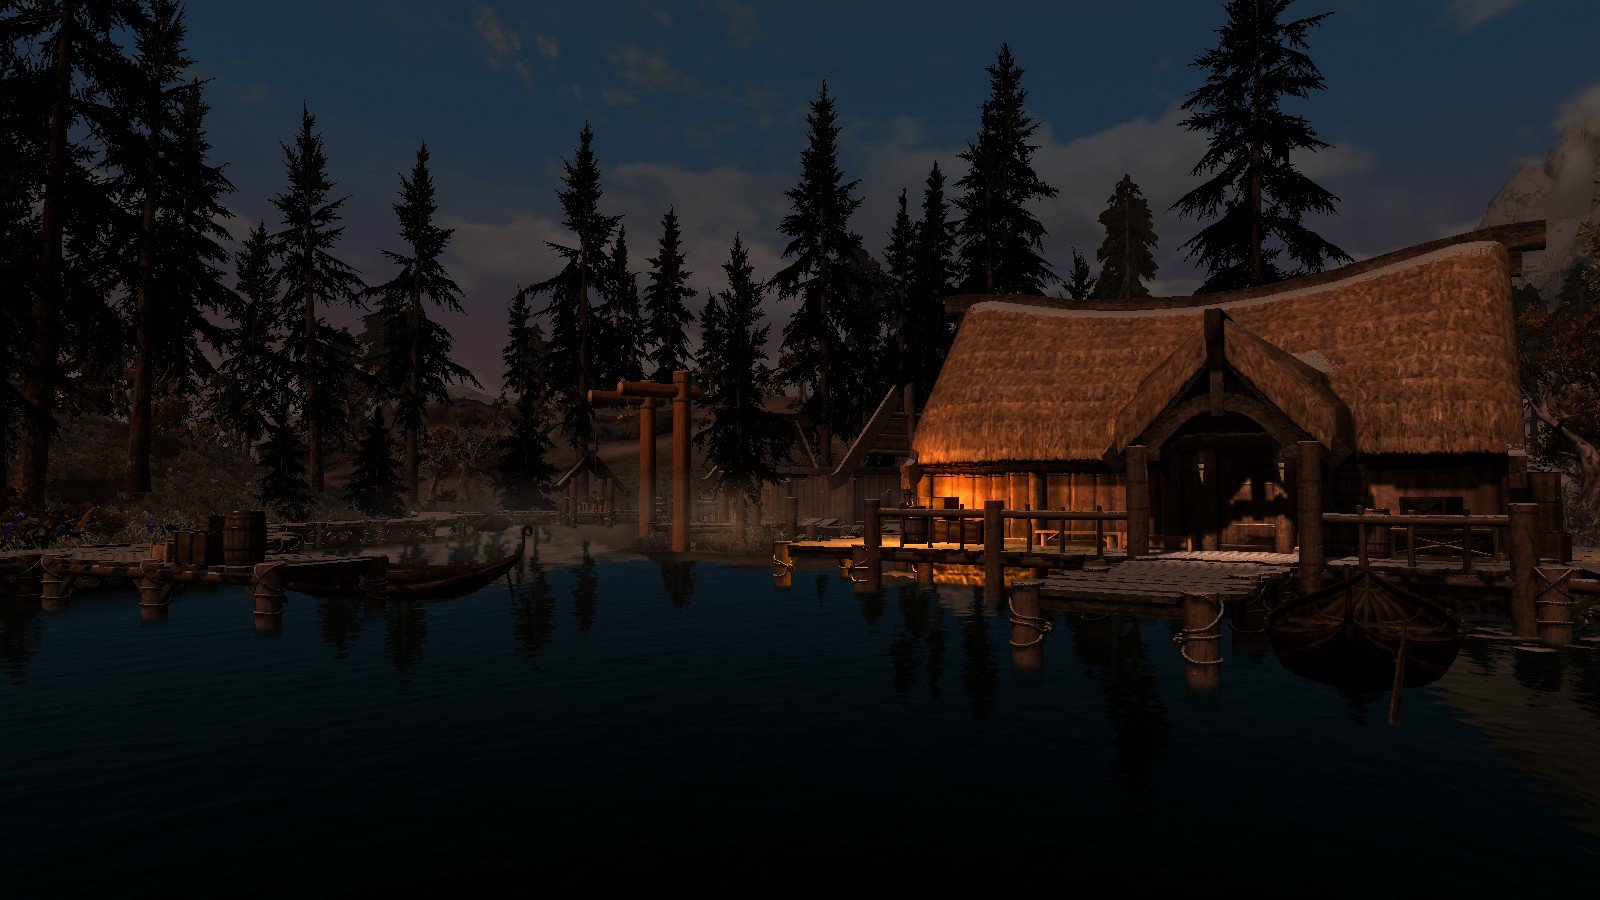 Village and City Homes - Houses and Dwellings - AFK Mods